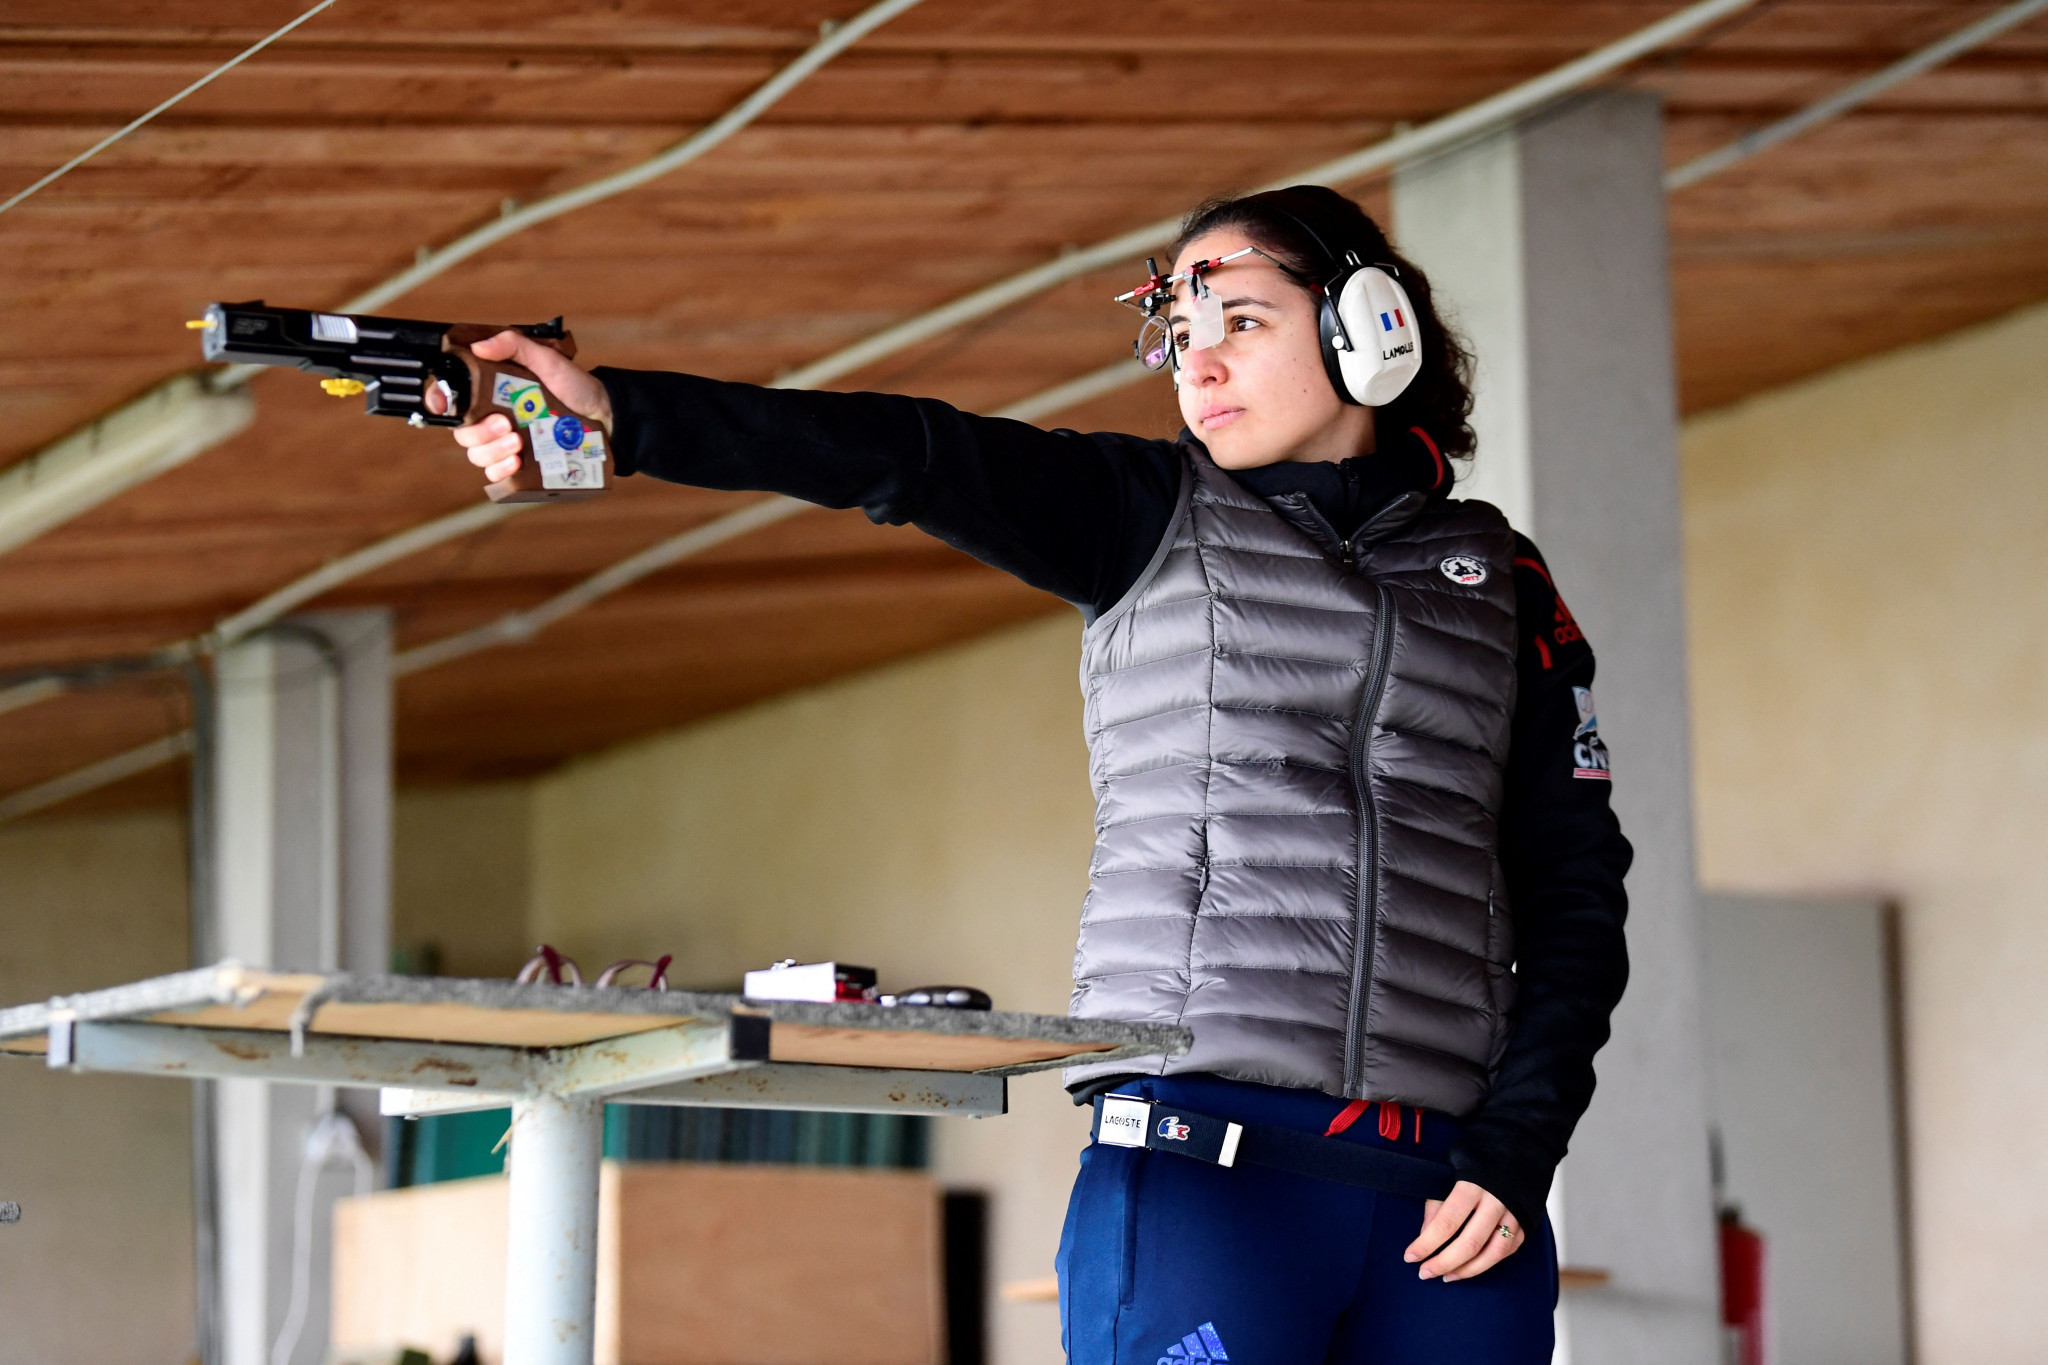 France's Mathilde Lamolle claimed gold in the women's 25m pistol tournament at the ISSF World Cup in Cairo ©Getty Images 